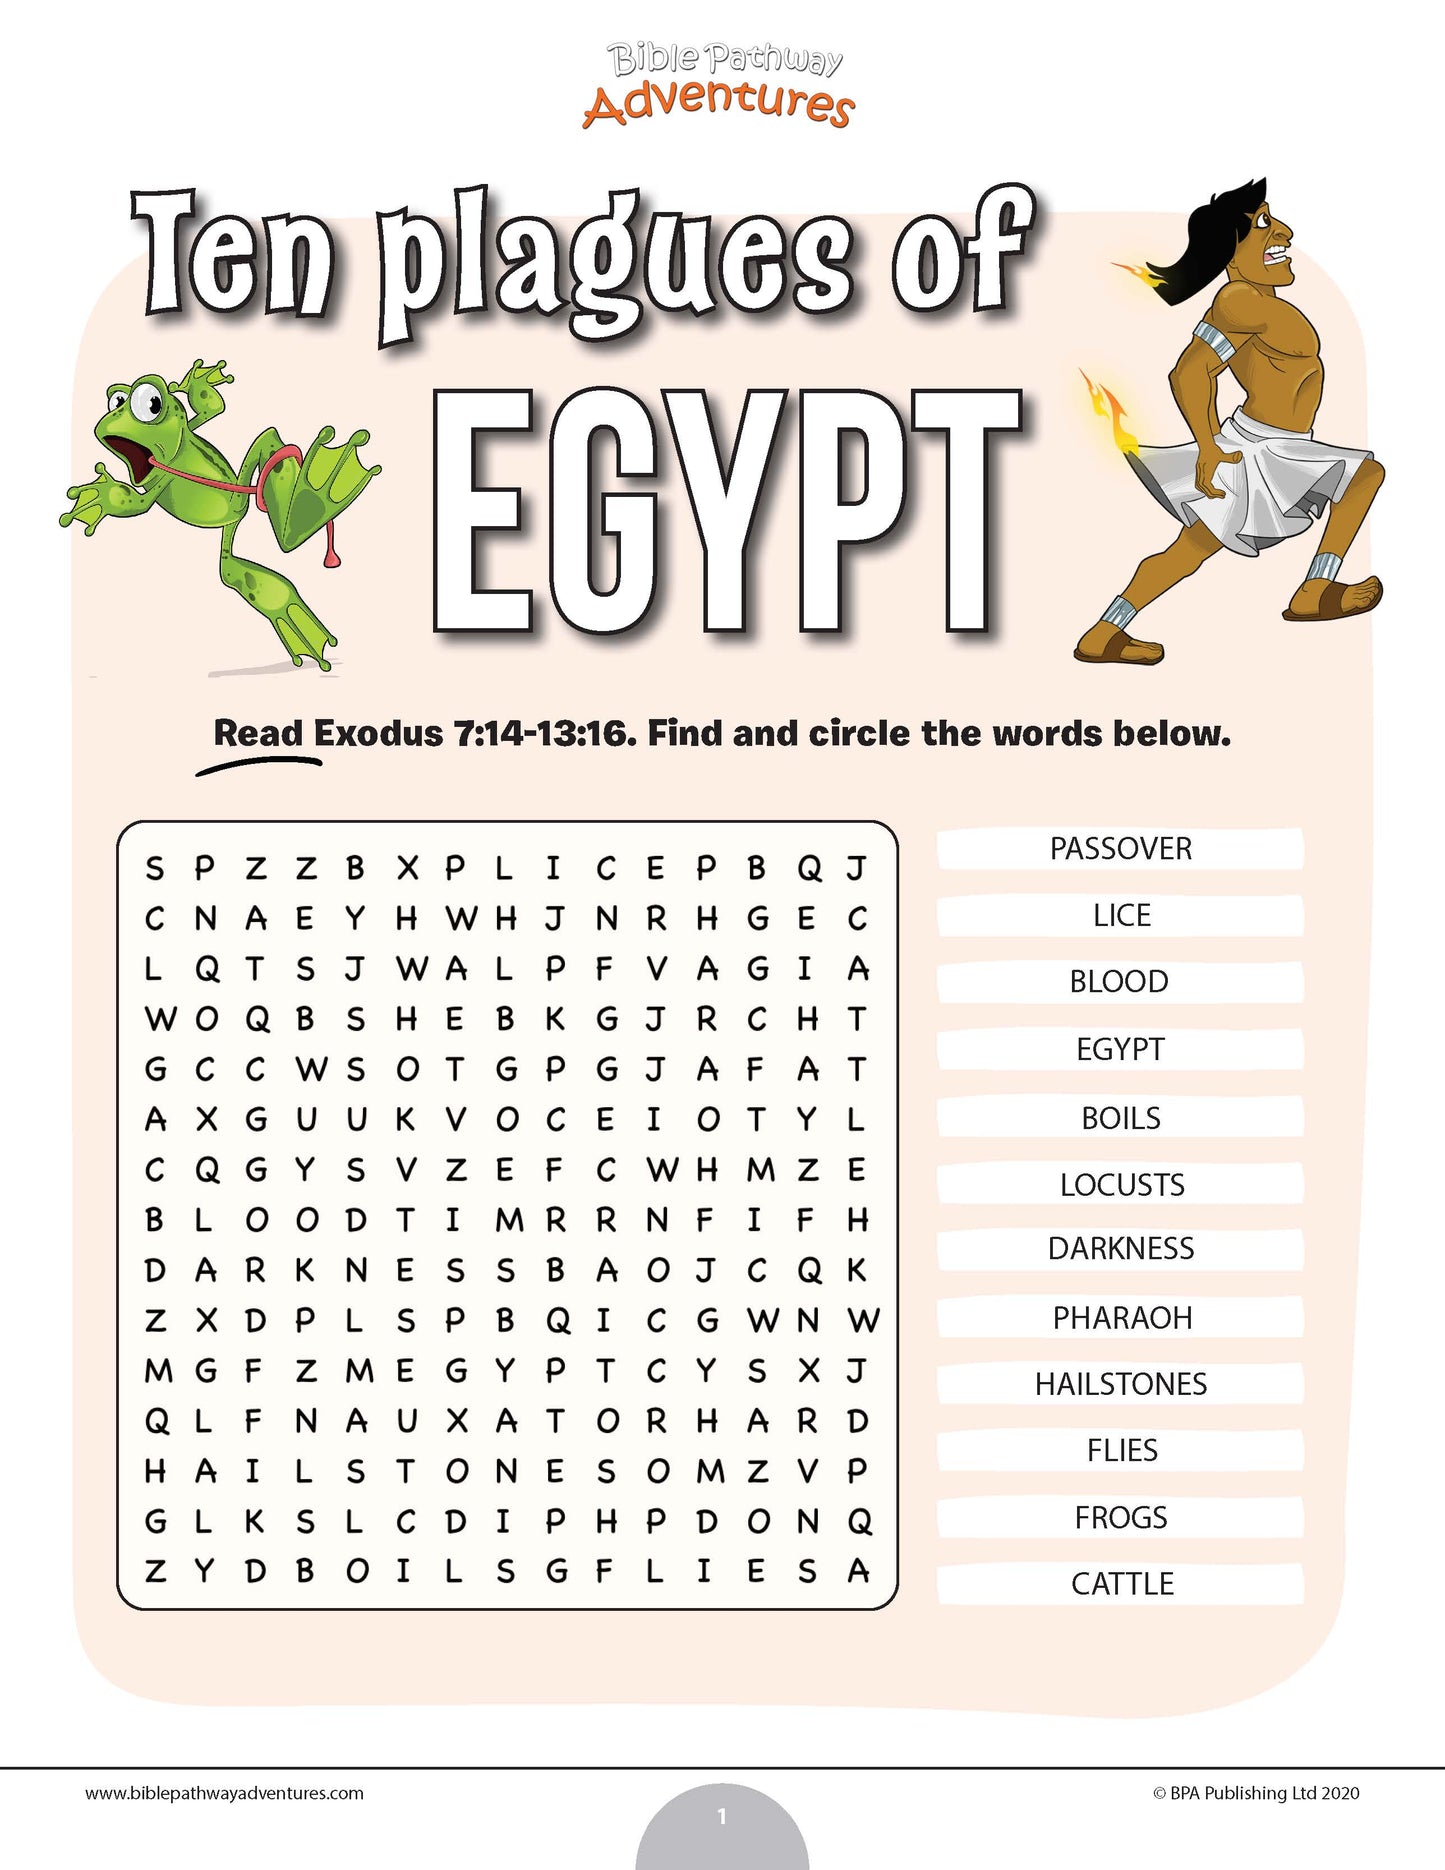 Ten Plagues of Egypt word search